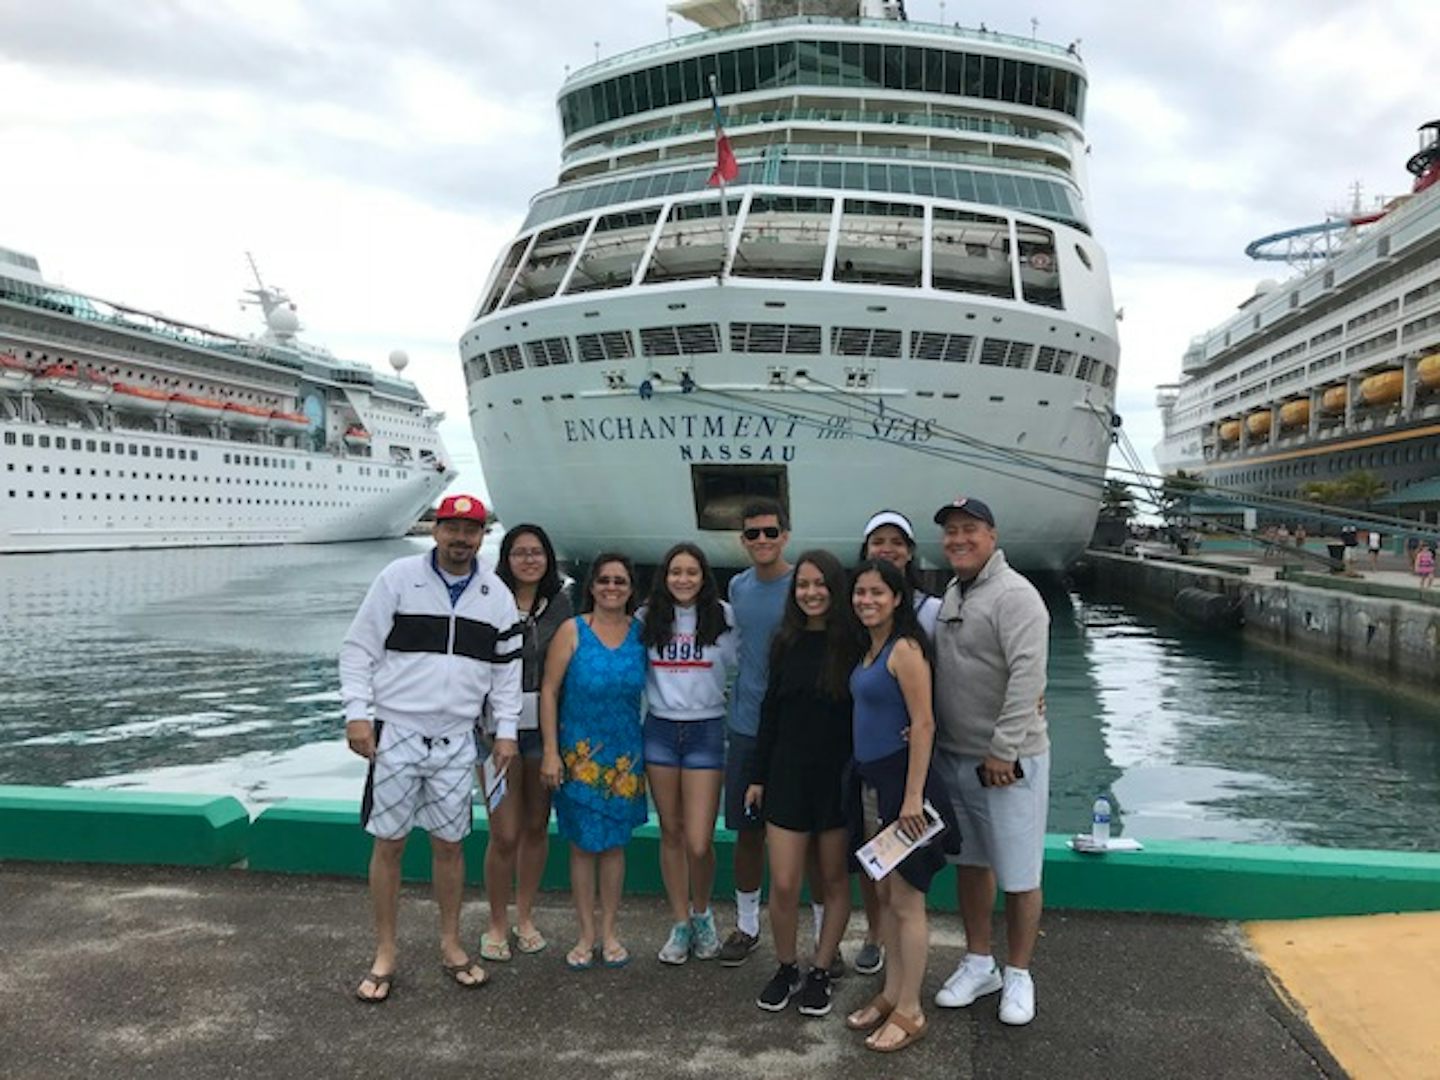 At the port in Nassau